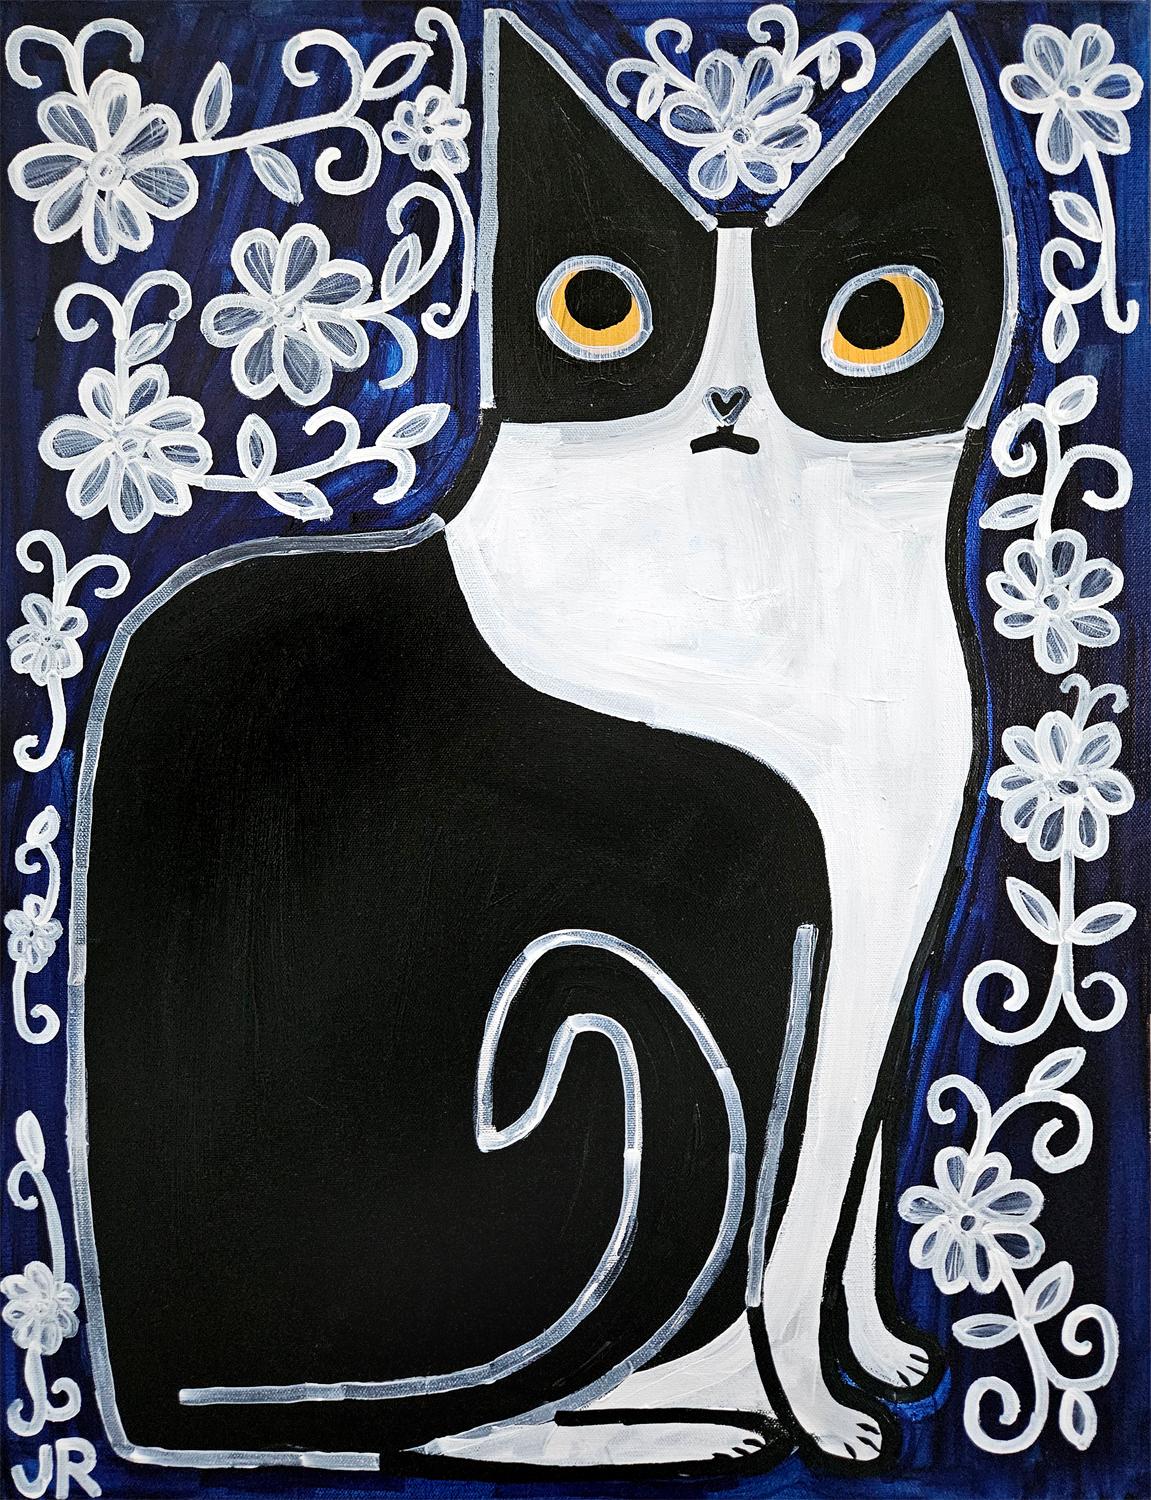 Jessica JH Roller Animal Painting - Rosemary on Deep Blue and Flowers, Original Painting